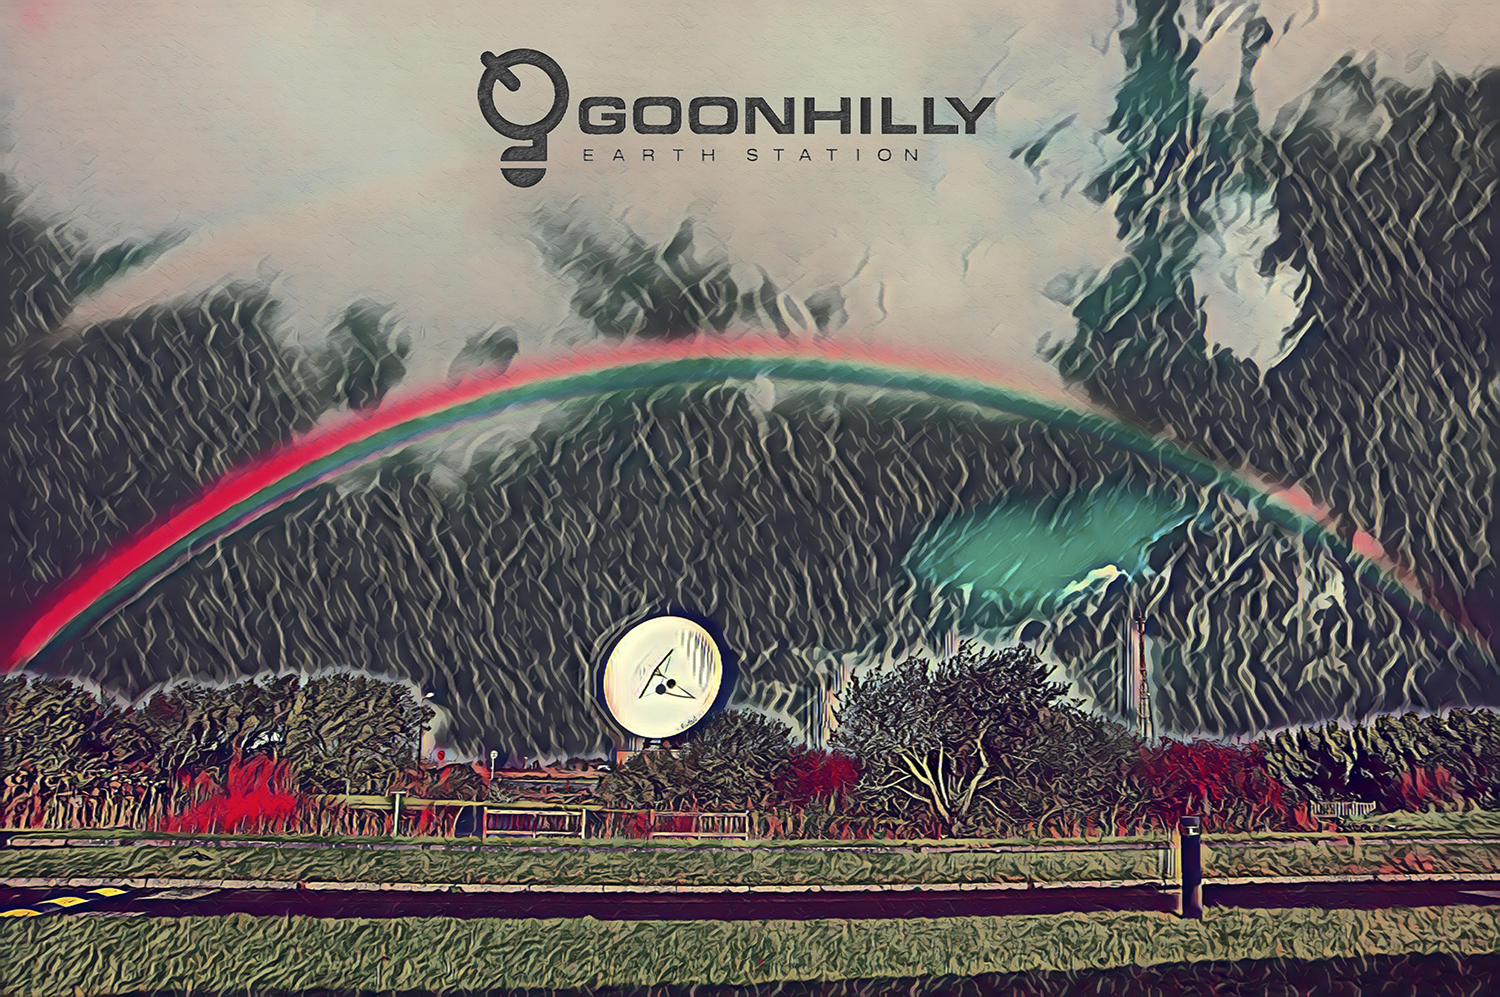 An artist's illustration depicting Goonhilly's 32m antenna under a rainbow